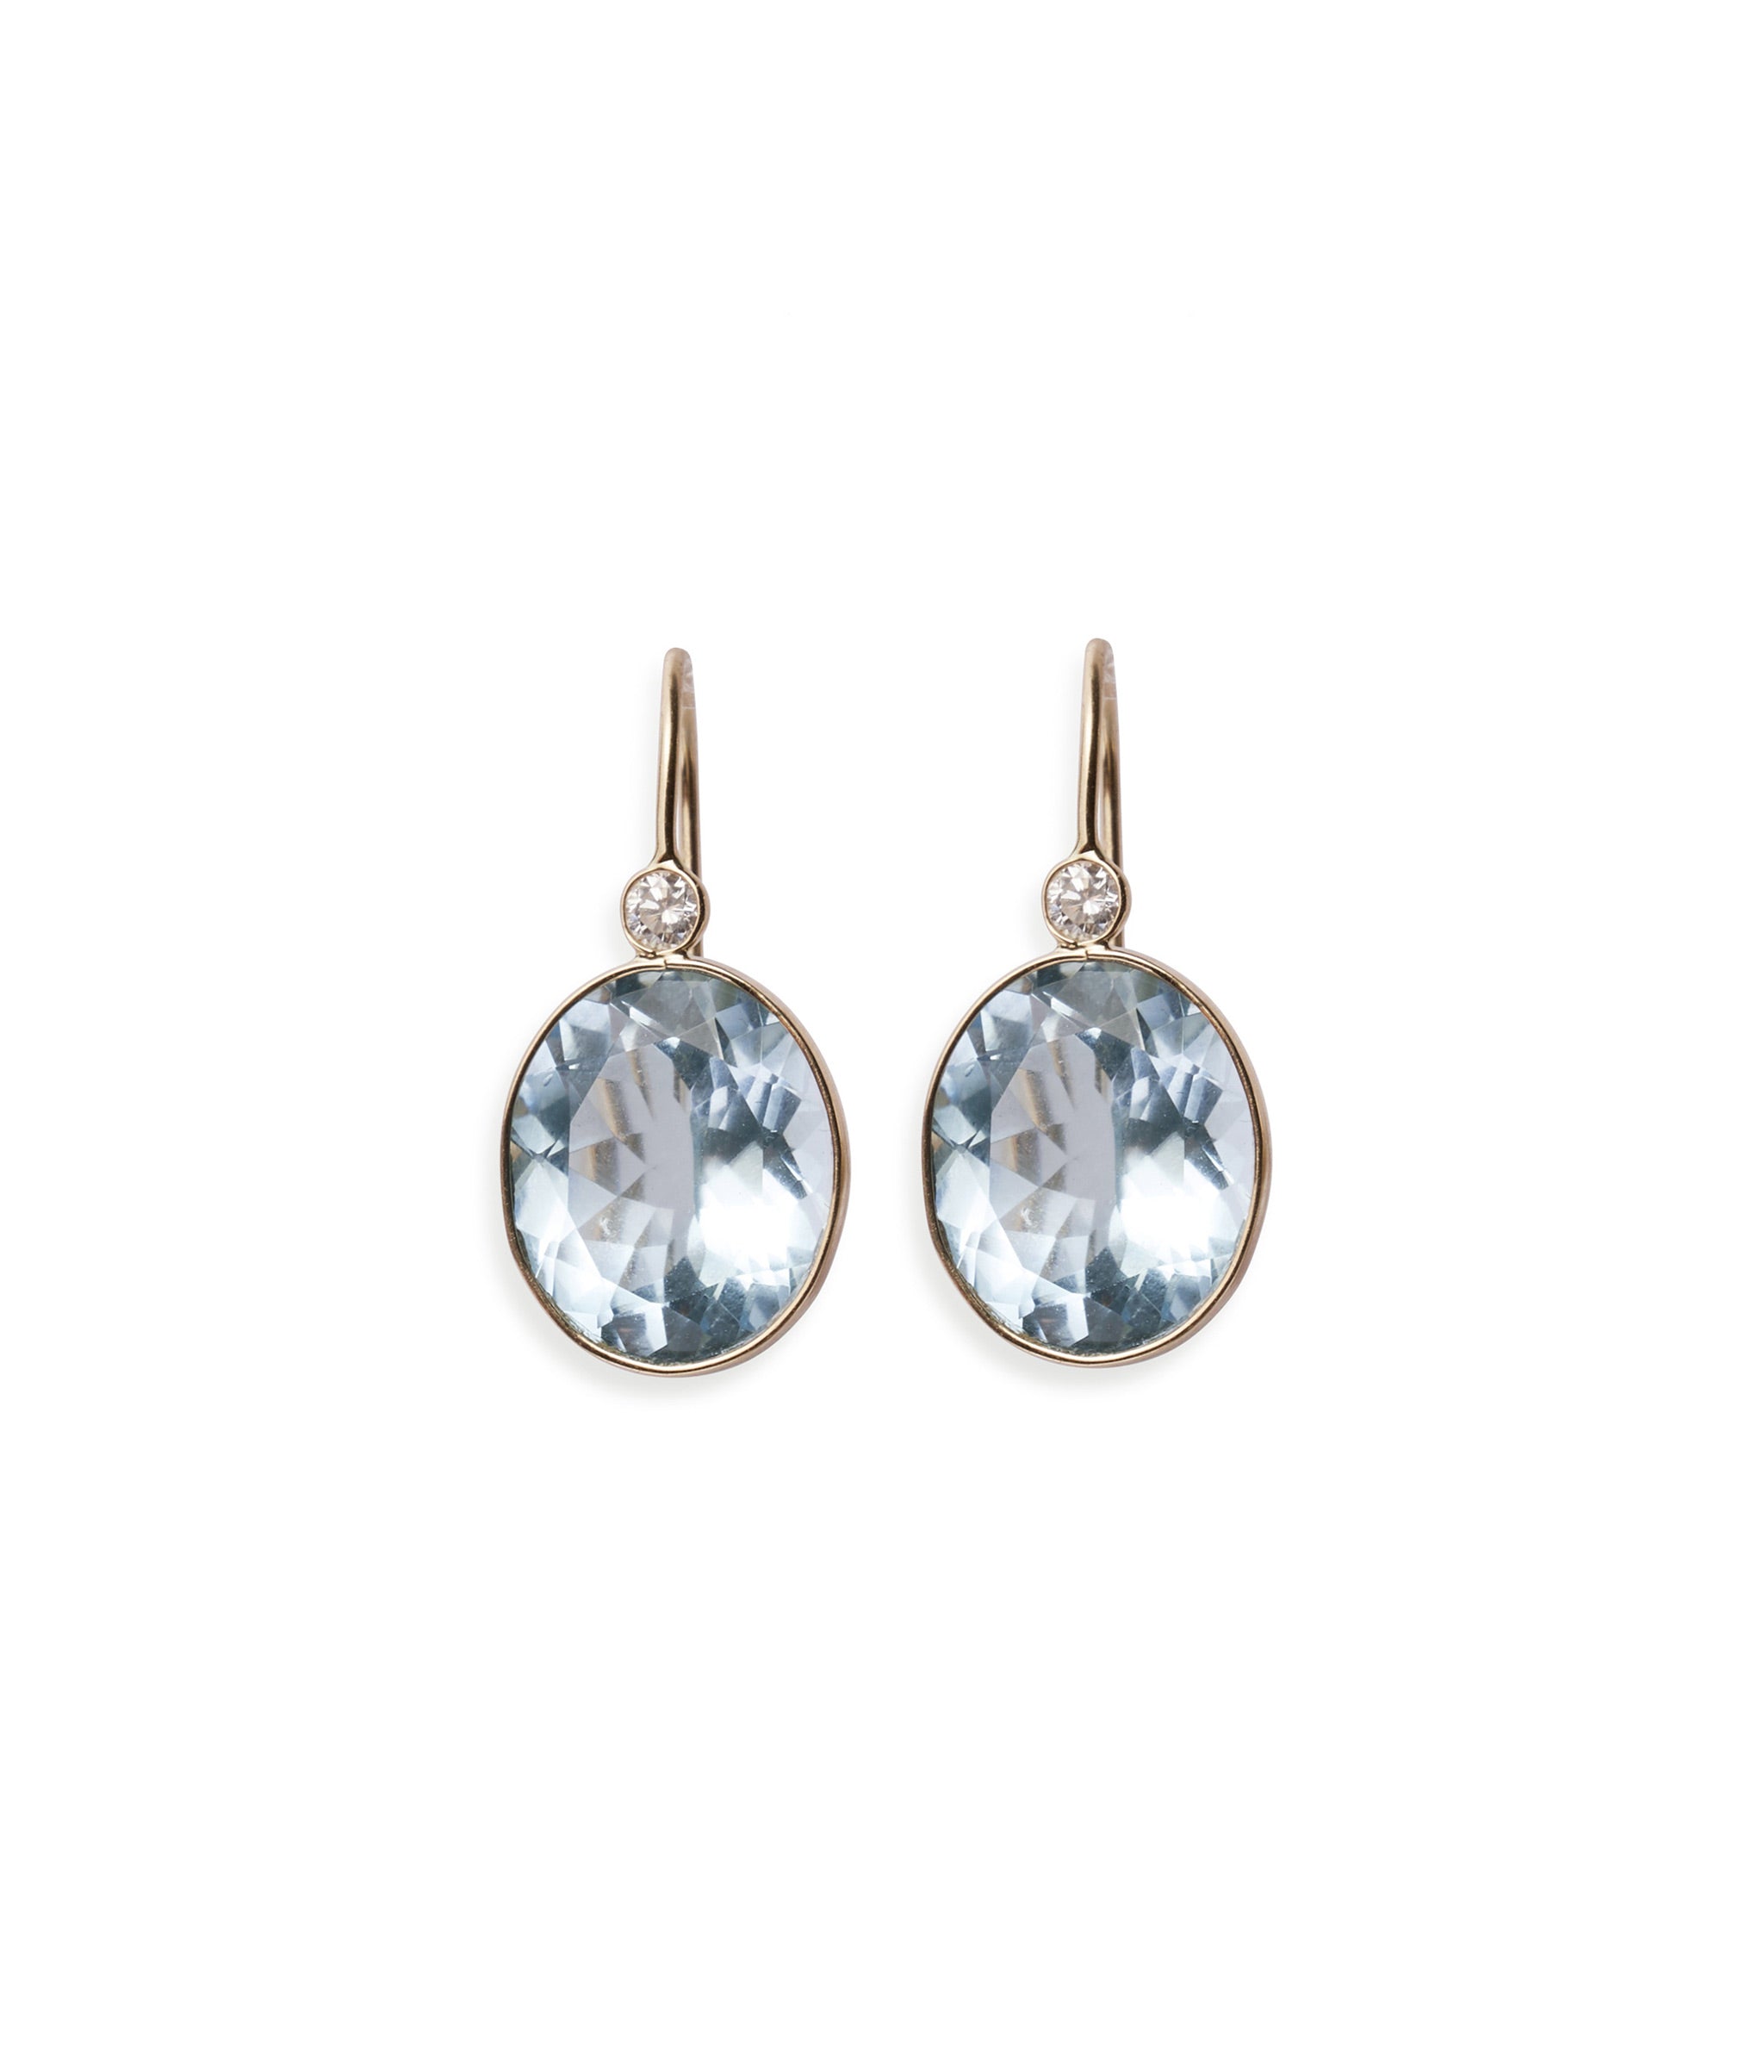 Pool Earrings in Blue Topaz & Diamond. Faceted blue topaz oval earrings with 14k gold bezels and diamond detail.